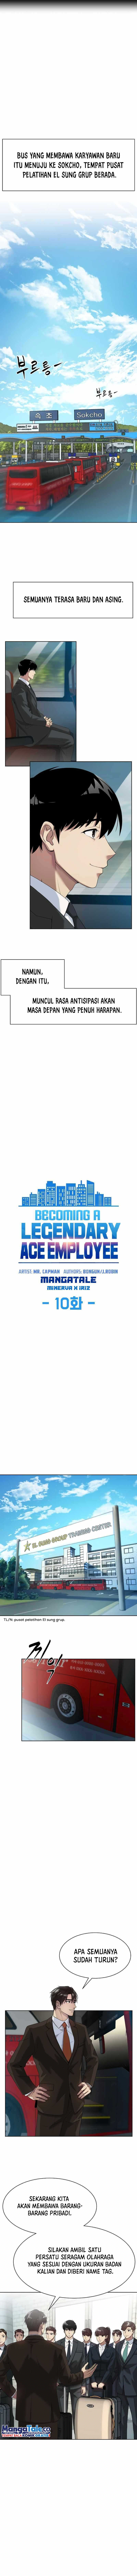 Becoming a Legendary Ace Employee Chapter 10